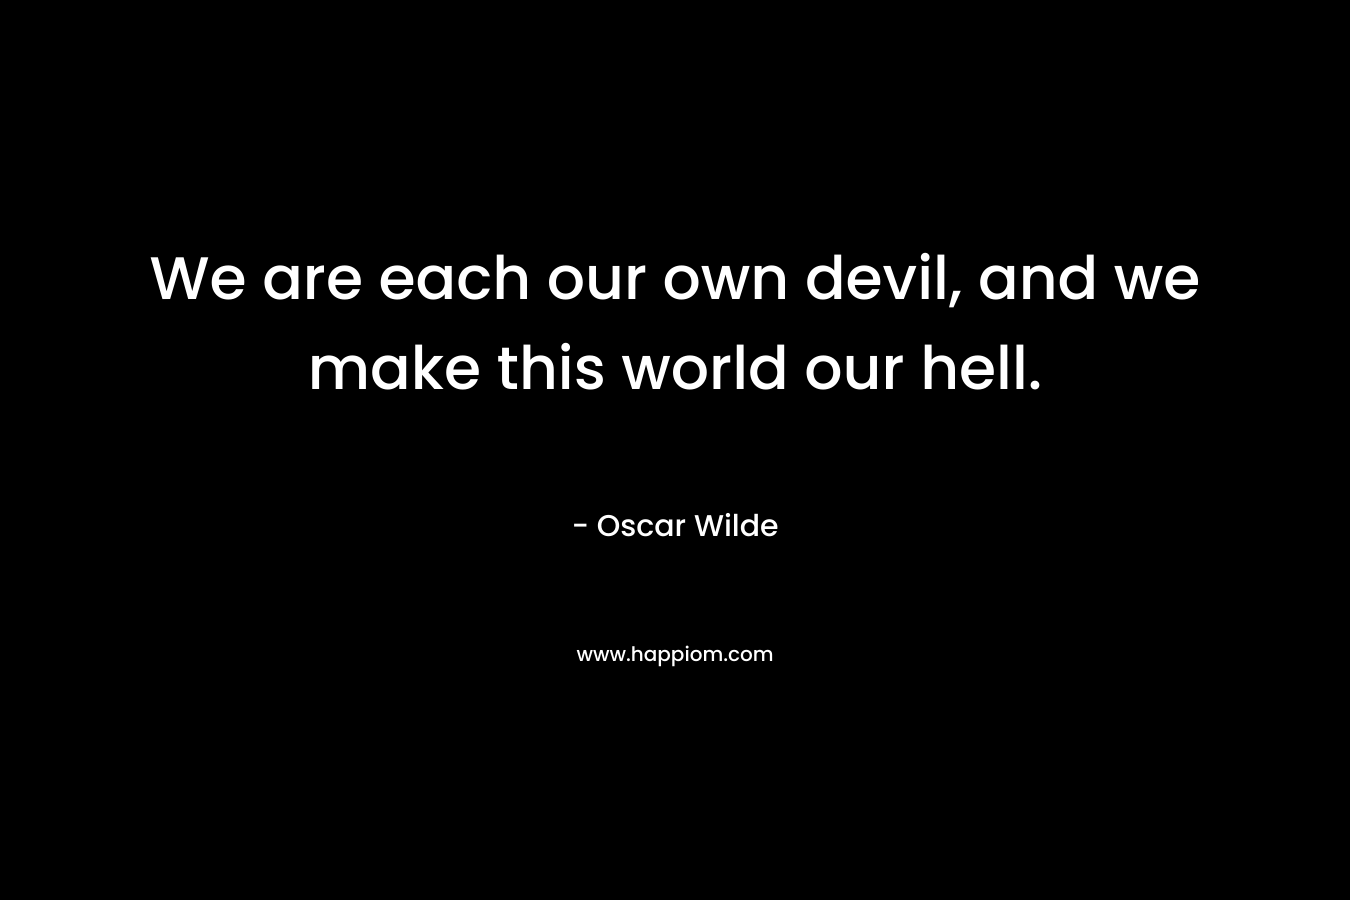 We are each our own devil, and we make this world our hell.